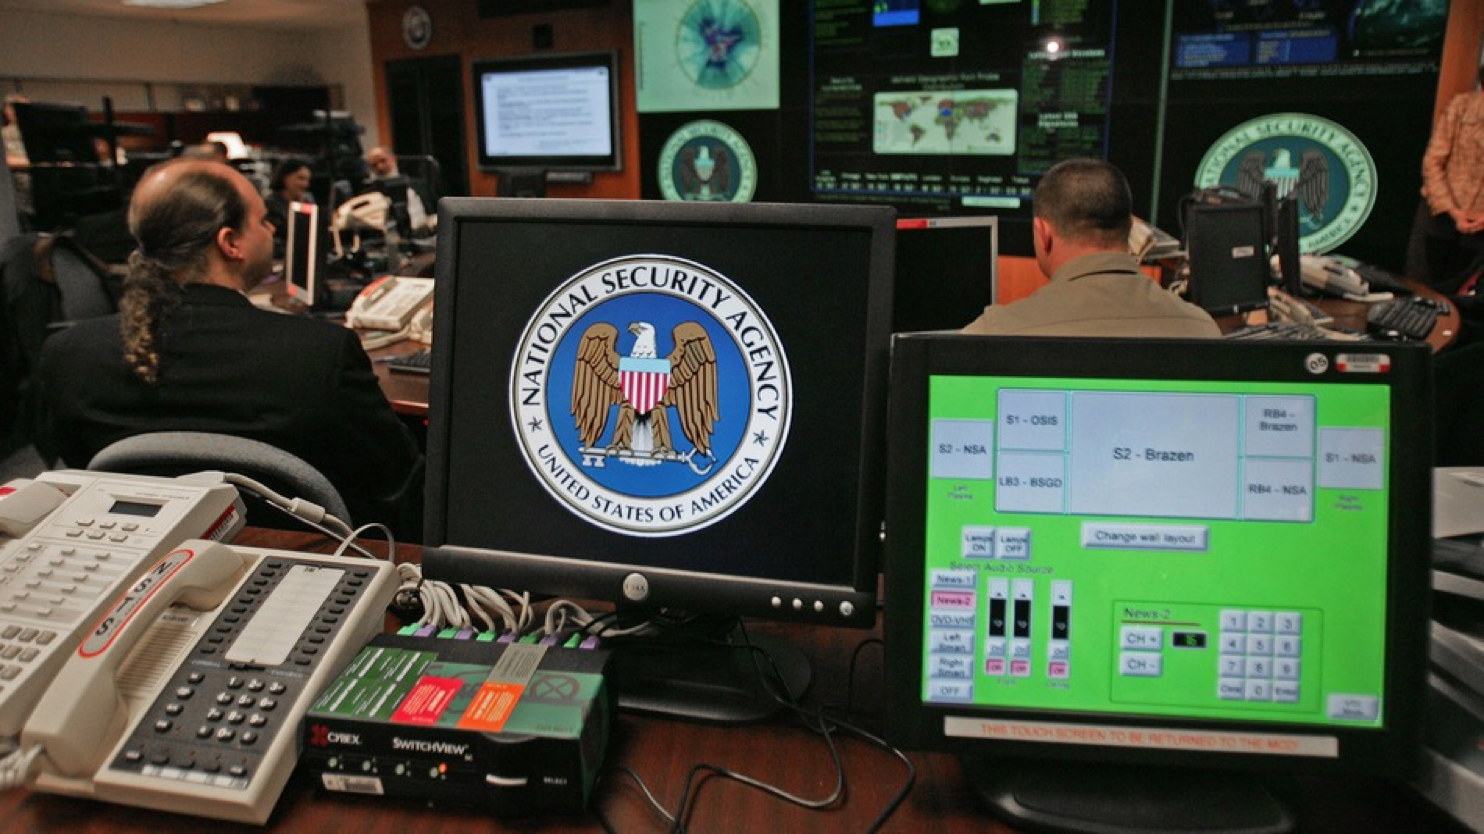 The leak of NSA hacking tools was caused by a staffer mistake